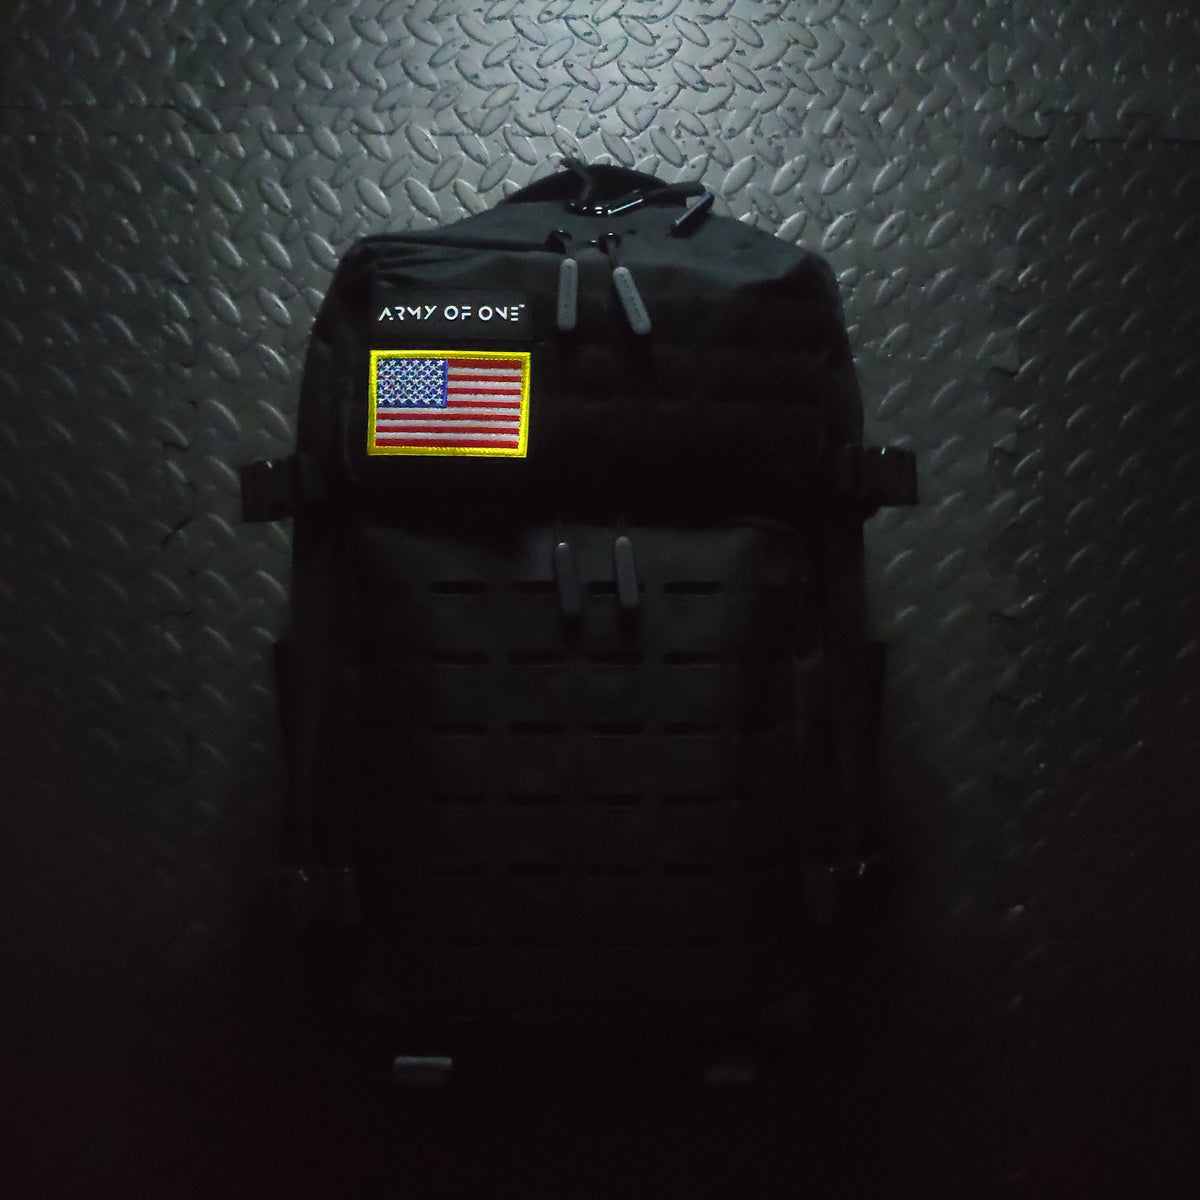 BLACK 45 LITRE ARMY OF ONE BACKPACK WITH VELCRO USA PATCH ATTACHED